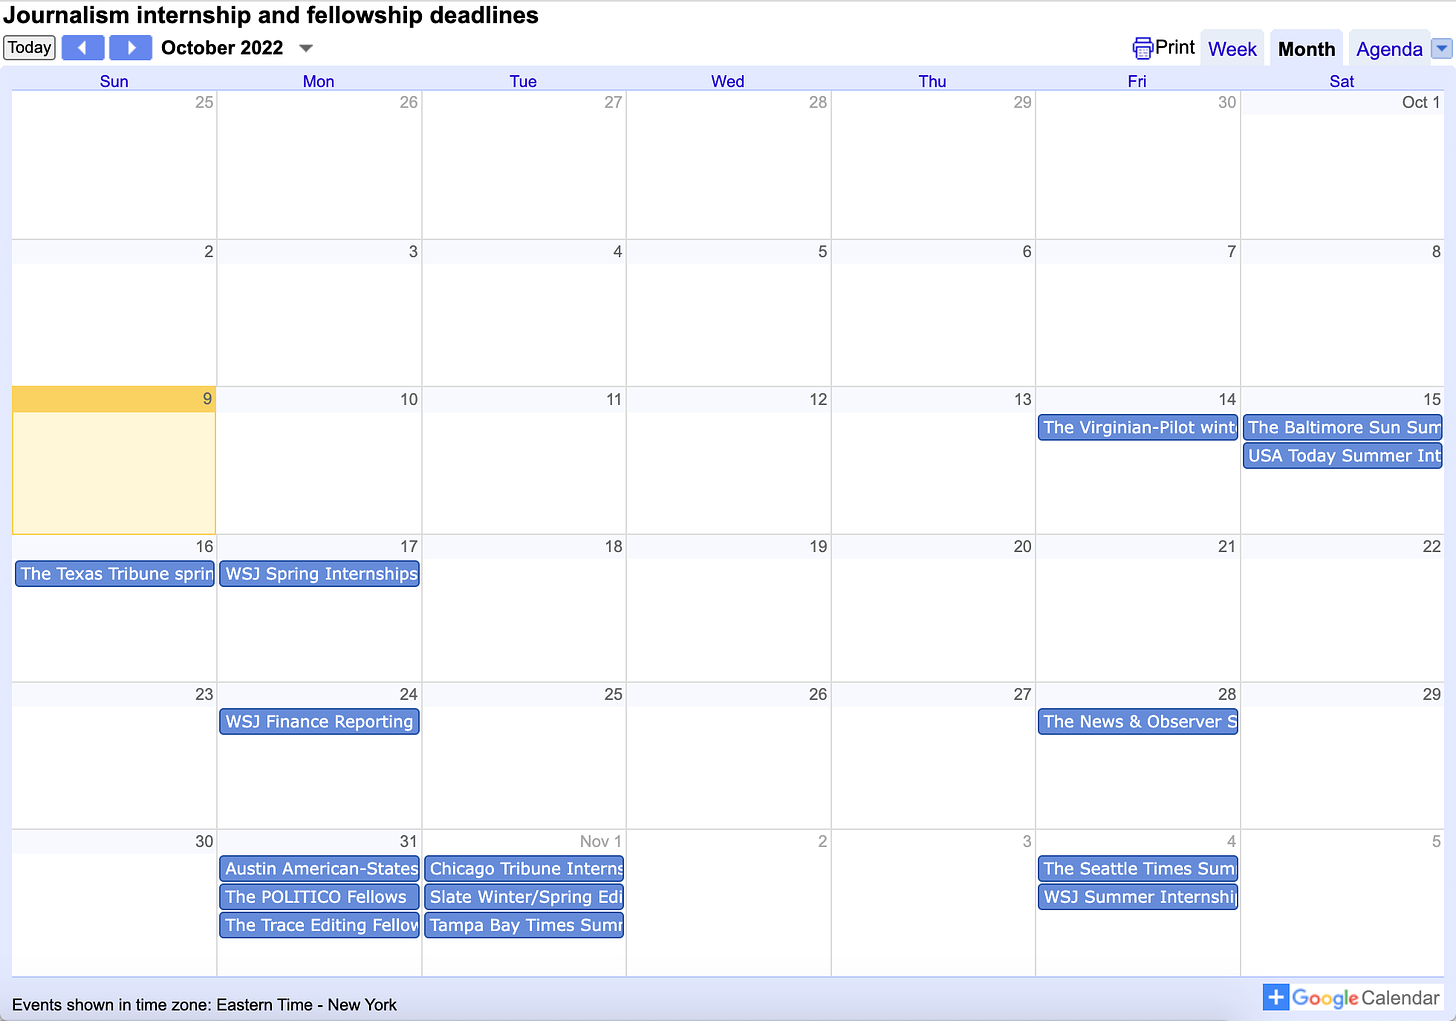 A calendar shows internship deadlines for WSJ, Chicago Tribune, the Tampa Bay Times and more.